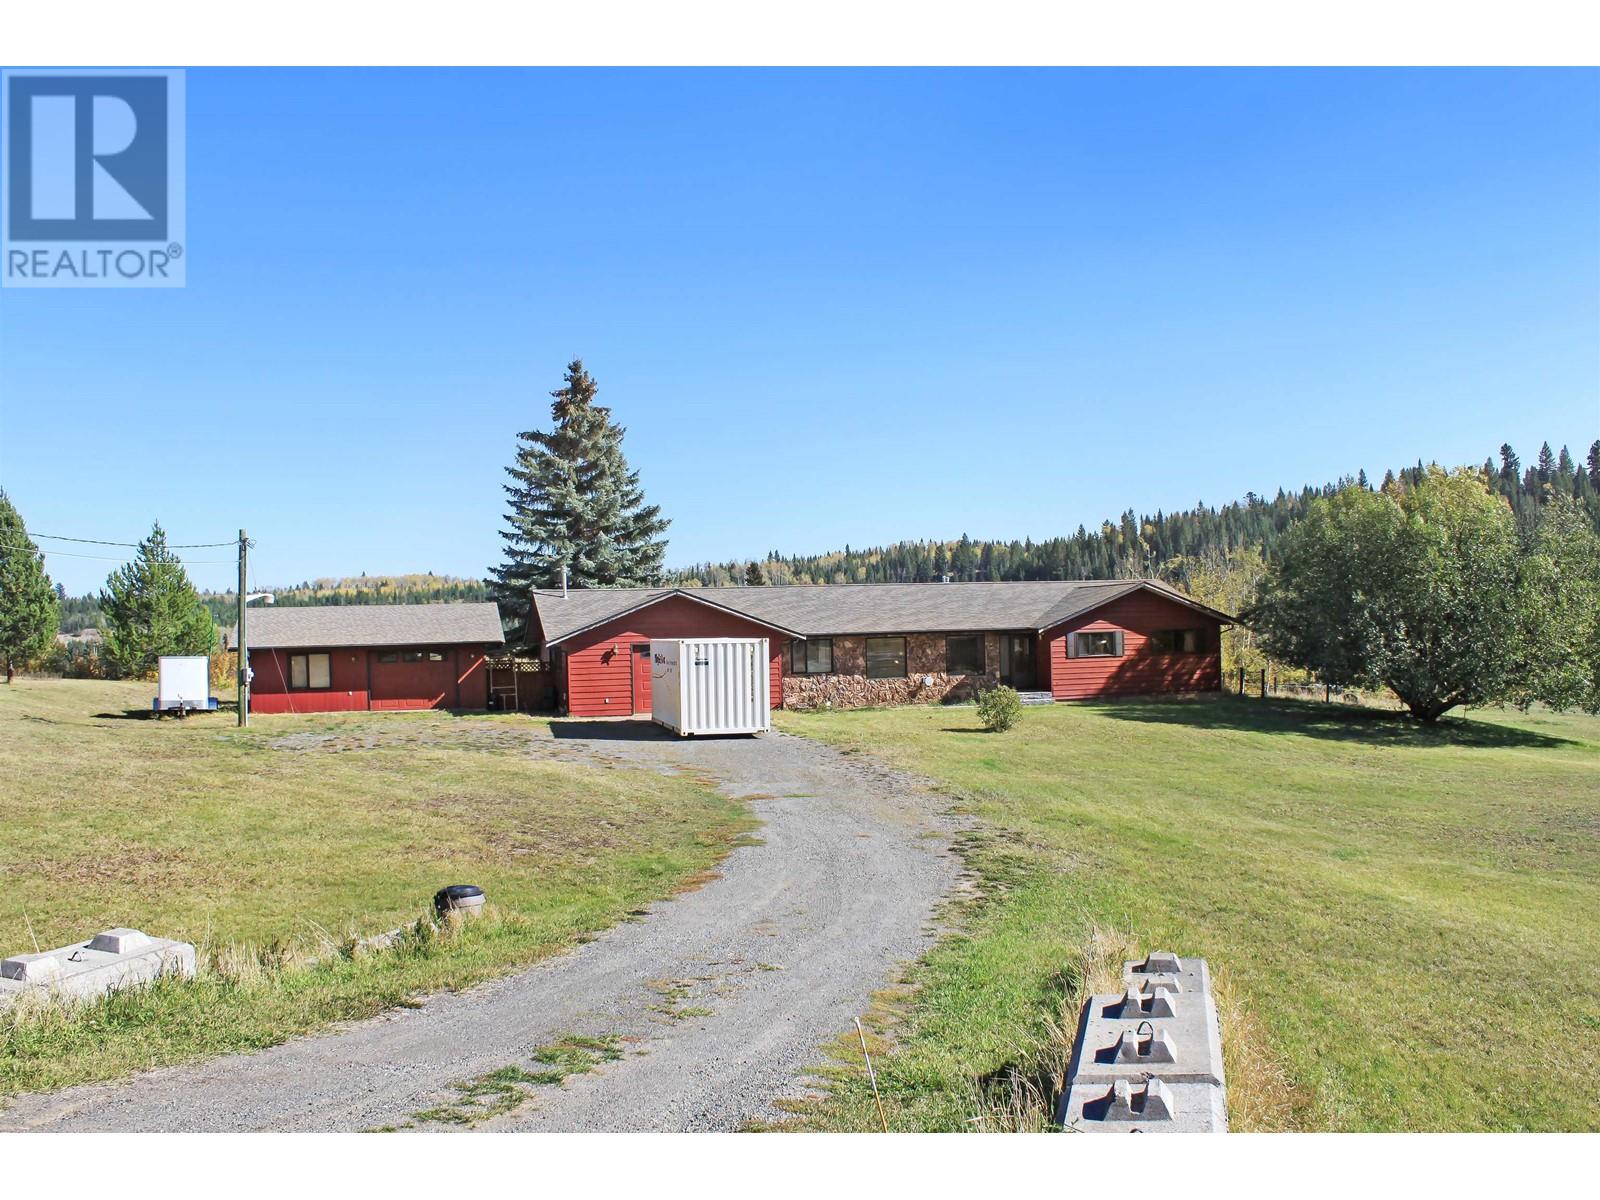 5411 KENNEDY ROAD, 100 mile house, British Columbia